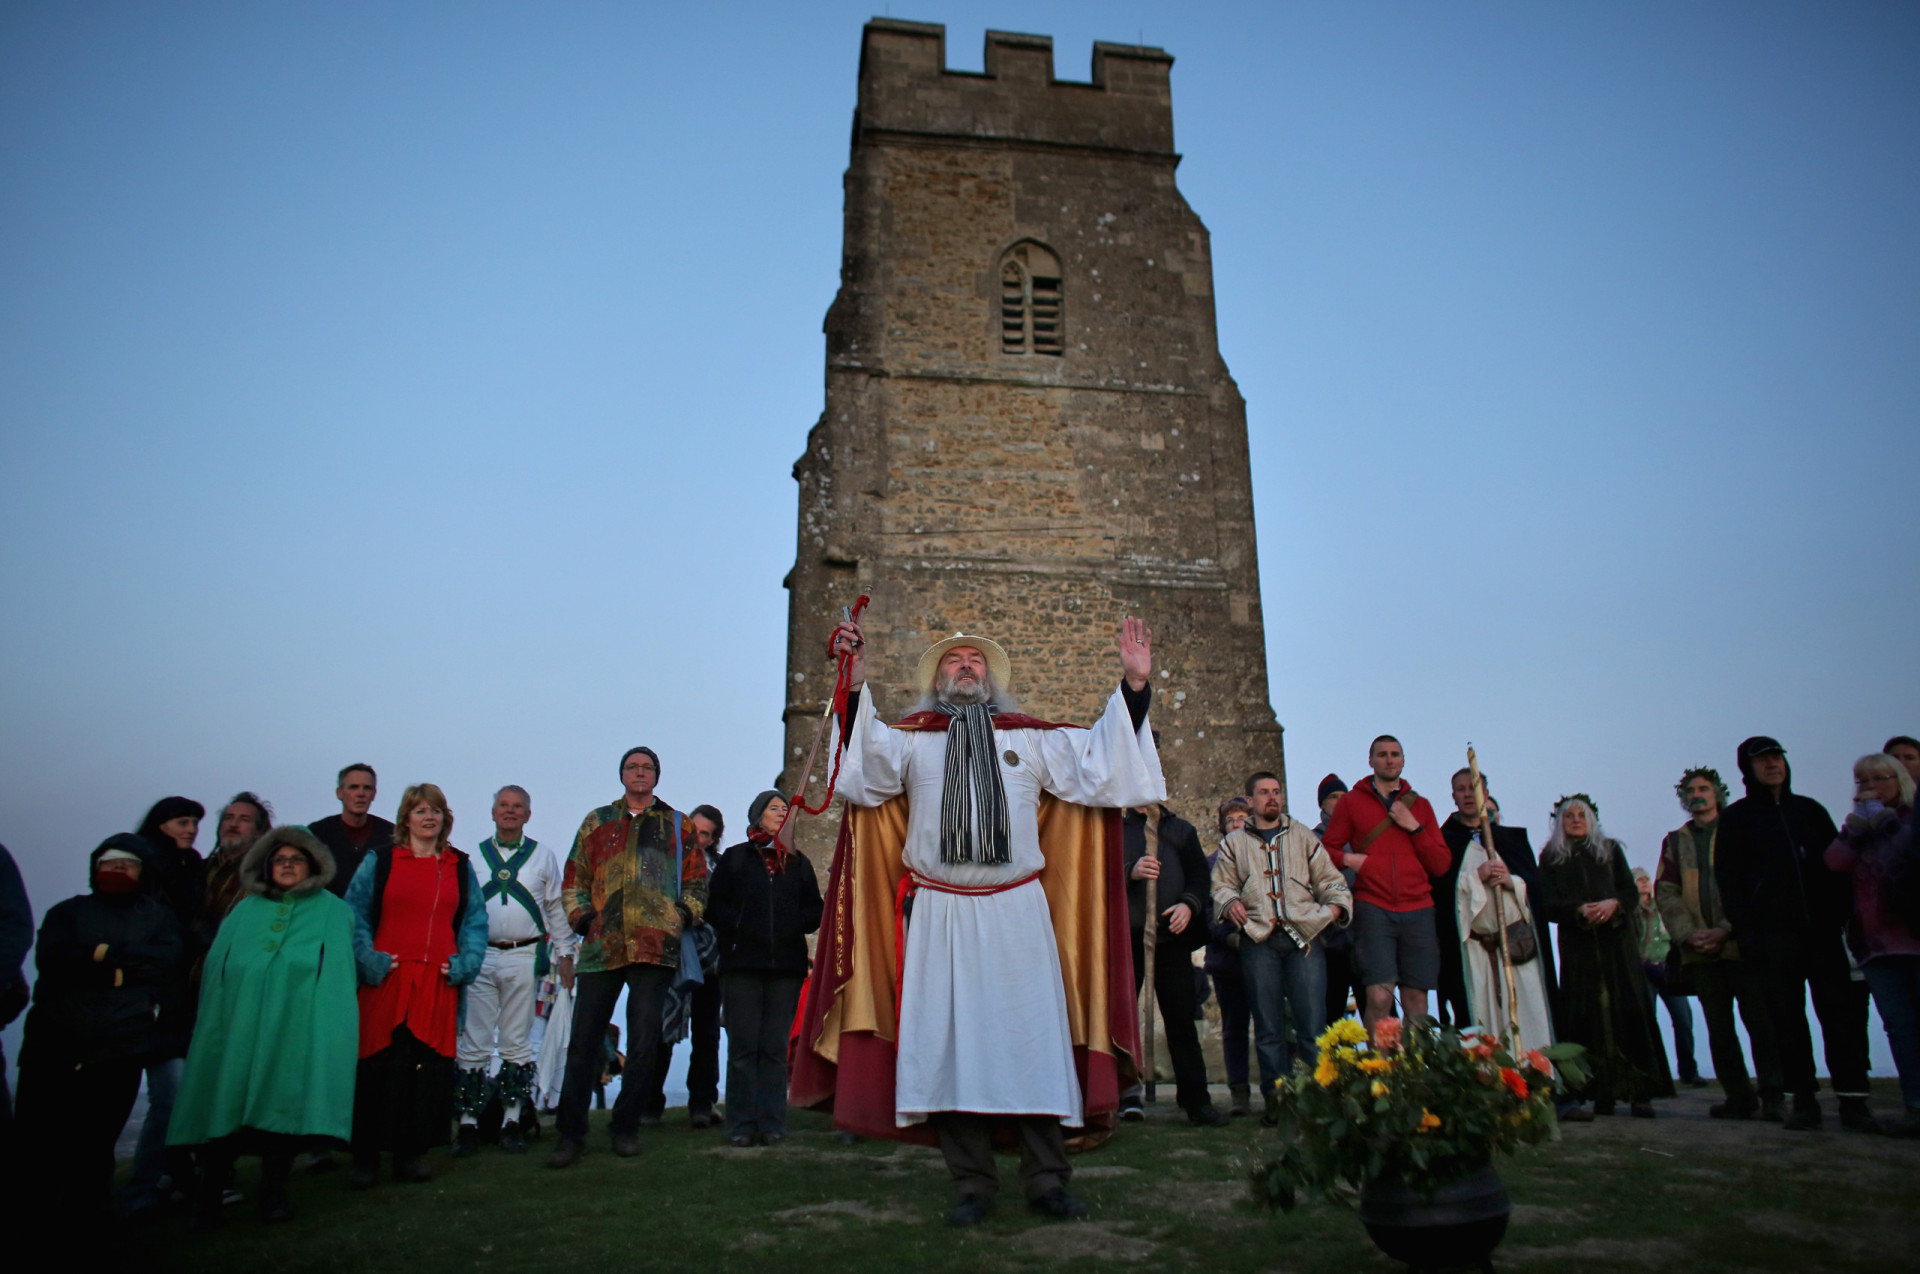 <p>The 44-mile (70-km) route takes travelers through the countryside of Southwest England’s Somerset County. From Glastonbury Tor to Stonehenge, the sites are famous for their Neo-Pagans and druid ceremonies.</p><p><a href="https://www.msn.com/en-us/community/channel/vid-7xx8mnucu55yw63we9va2gwr7uihbxwc68fxqp25x6tg4ftibpra?cvid=94631541bc0f4f89bfd59158d696ad7e">Follow us and access great exclusive content every day</a></p>